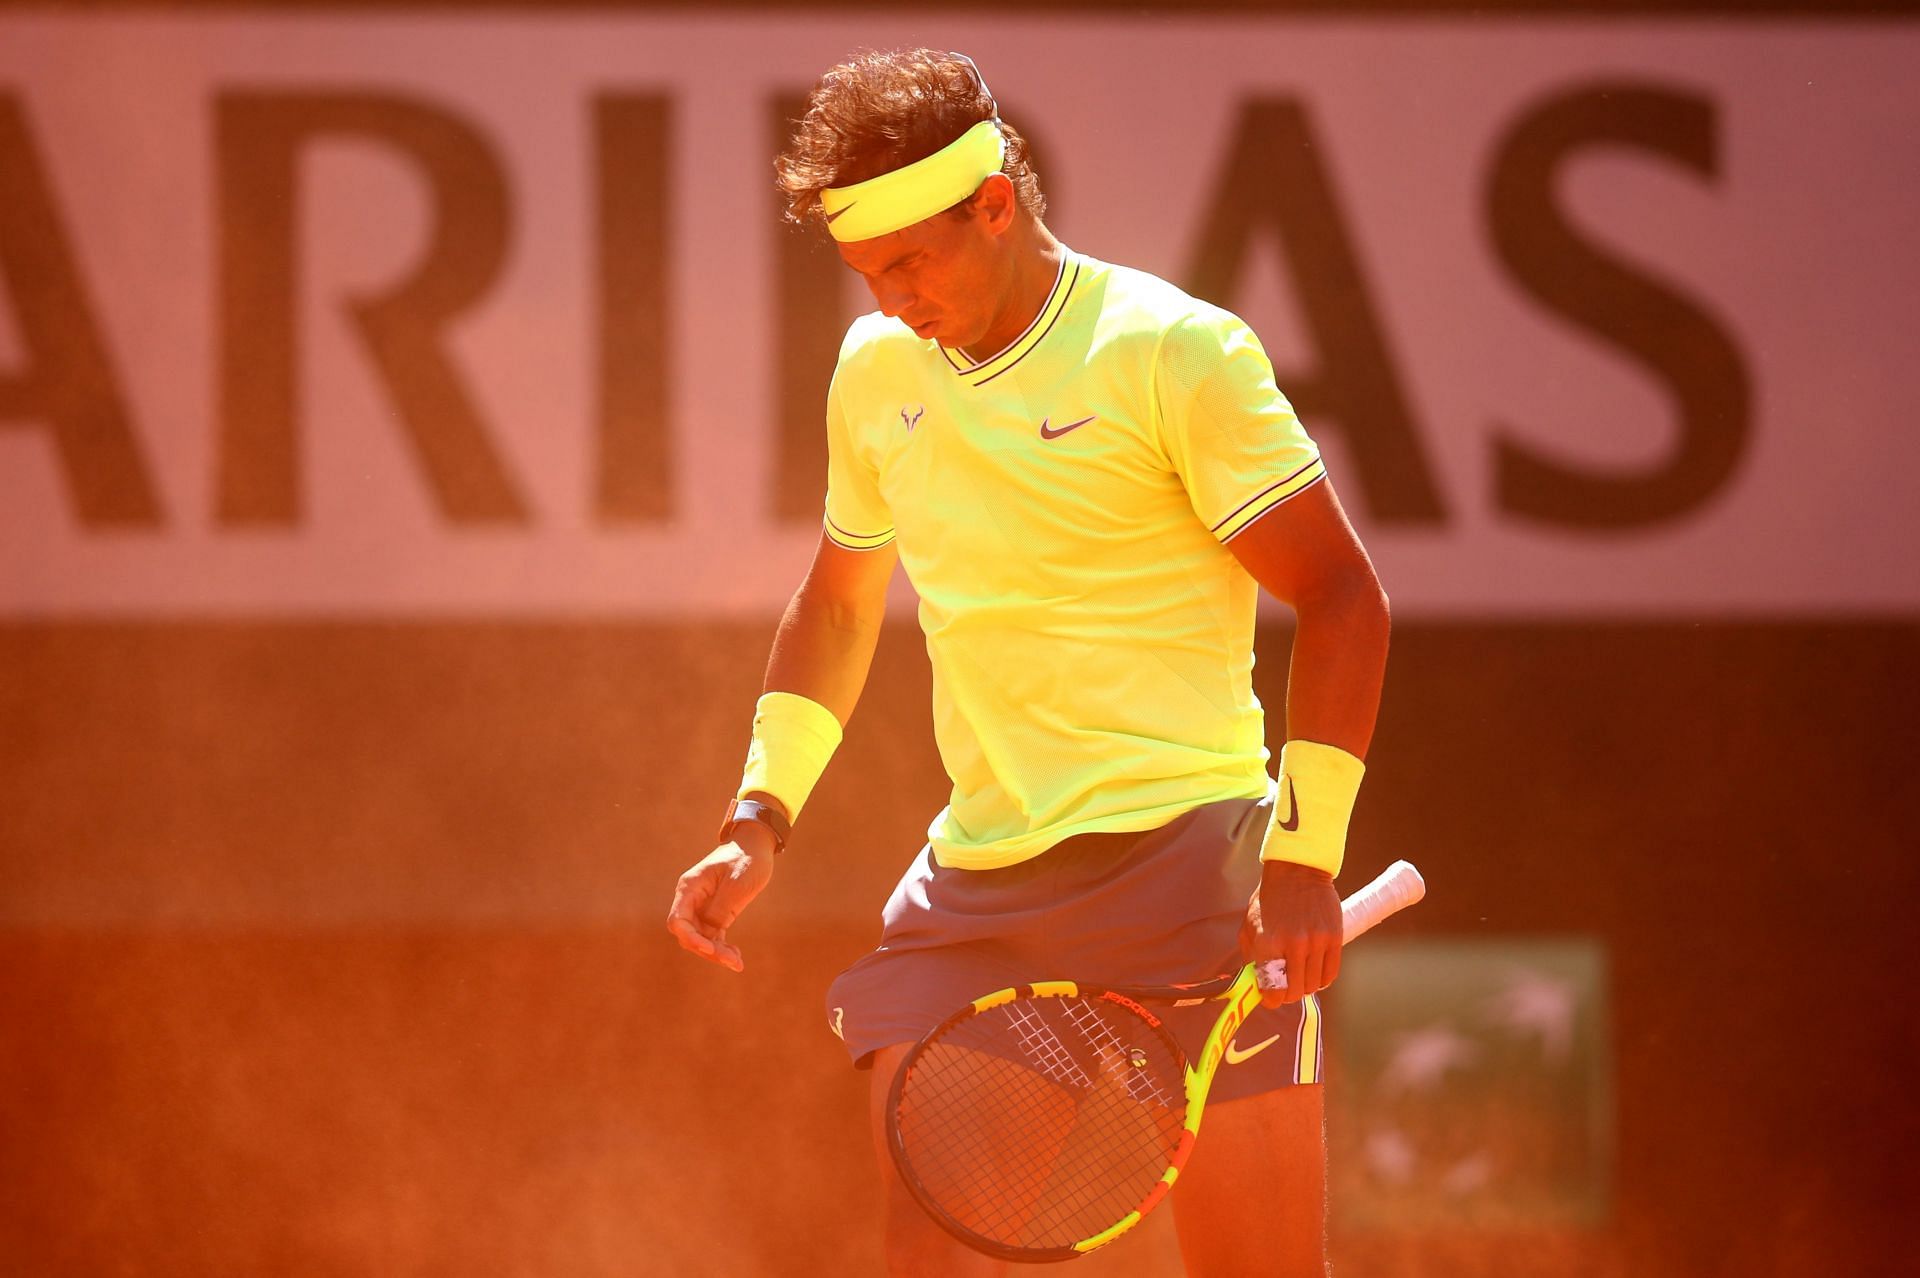 Almost every imaginable record on clay belongs to Rafael Nadal